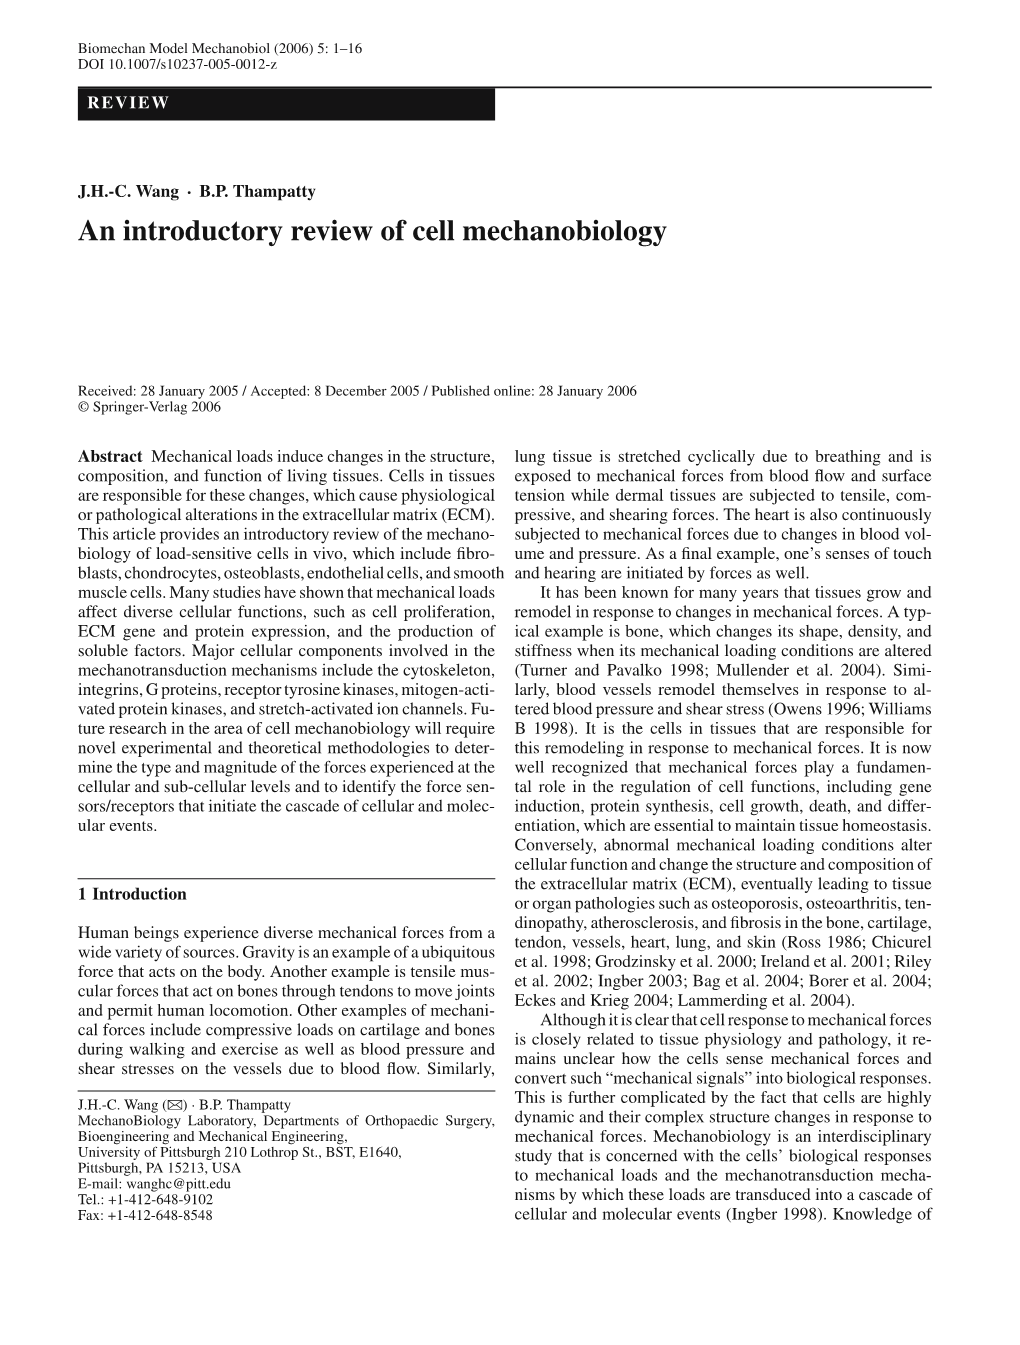 An Introductory Review of Cell Mechanobiology